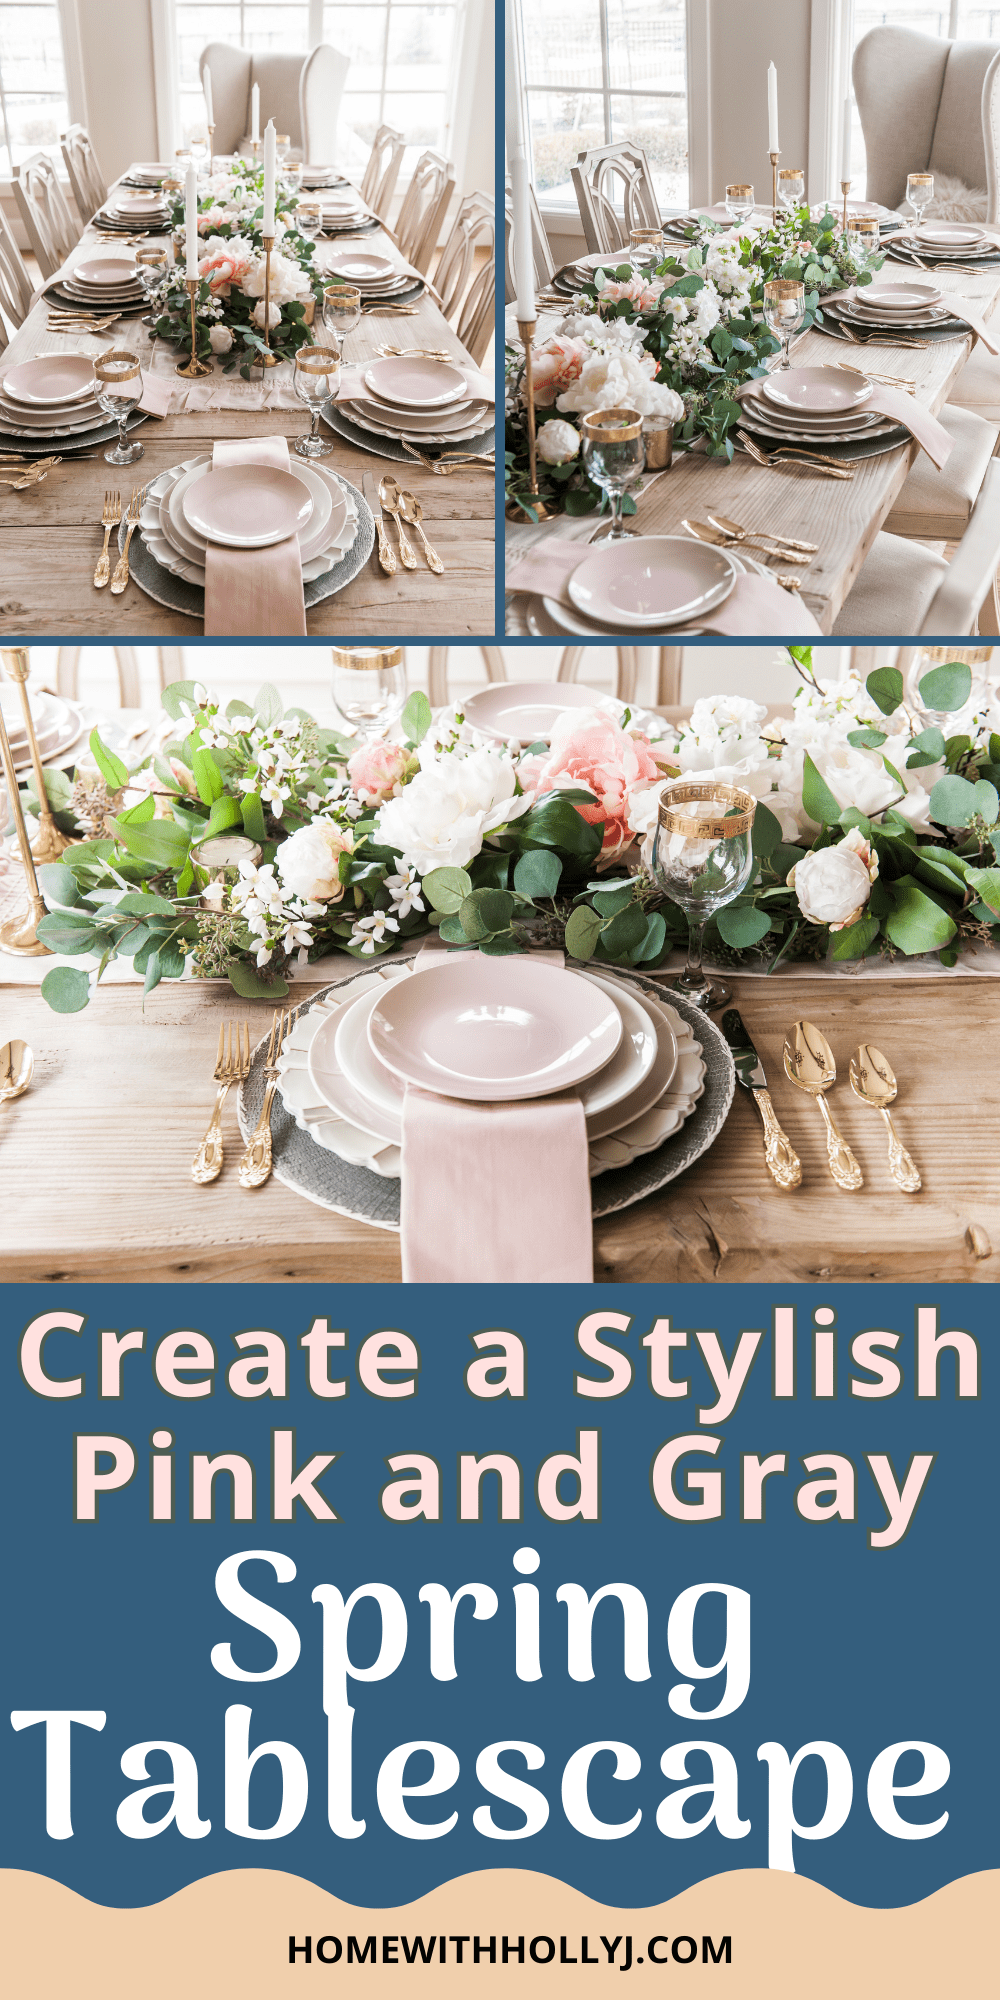 Bring the beauty of spring into your home with this stylish pink and gray tablescape. Follow our guide to create your own stunning tablescape.